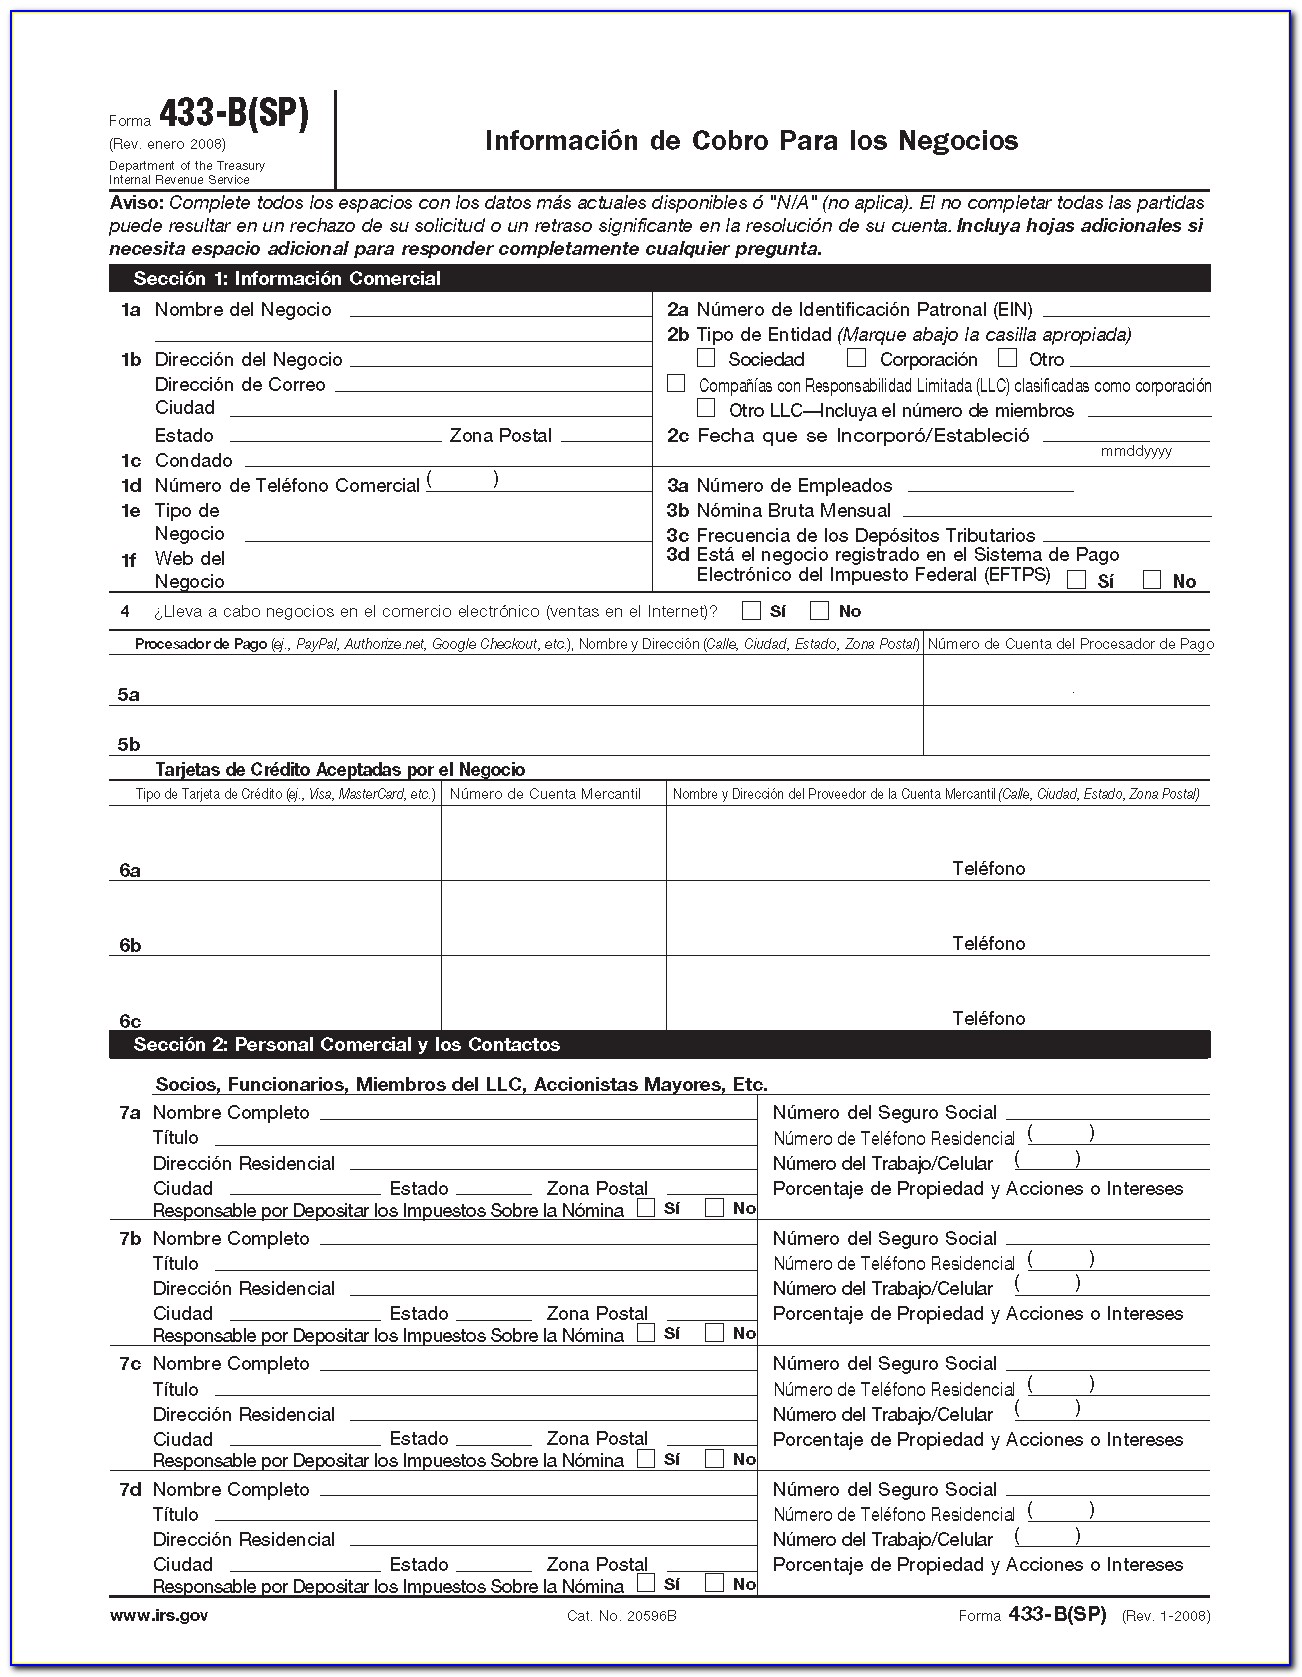 How To Fill Out Schedule 1 Form 2290